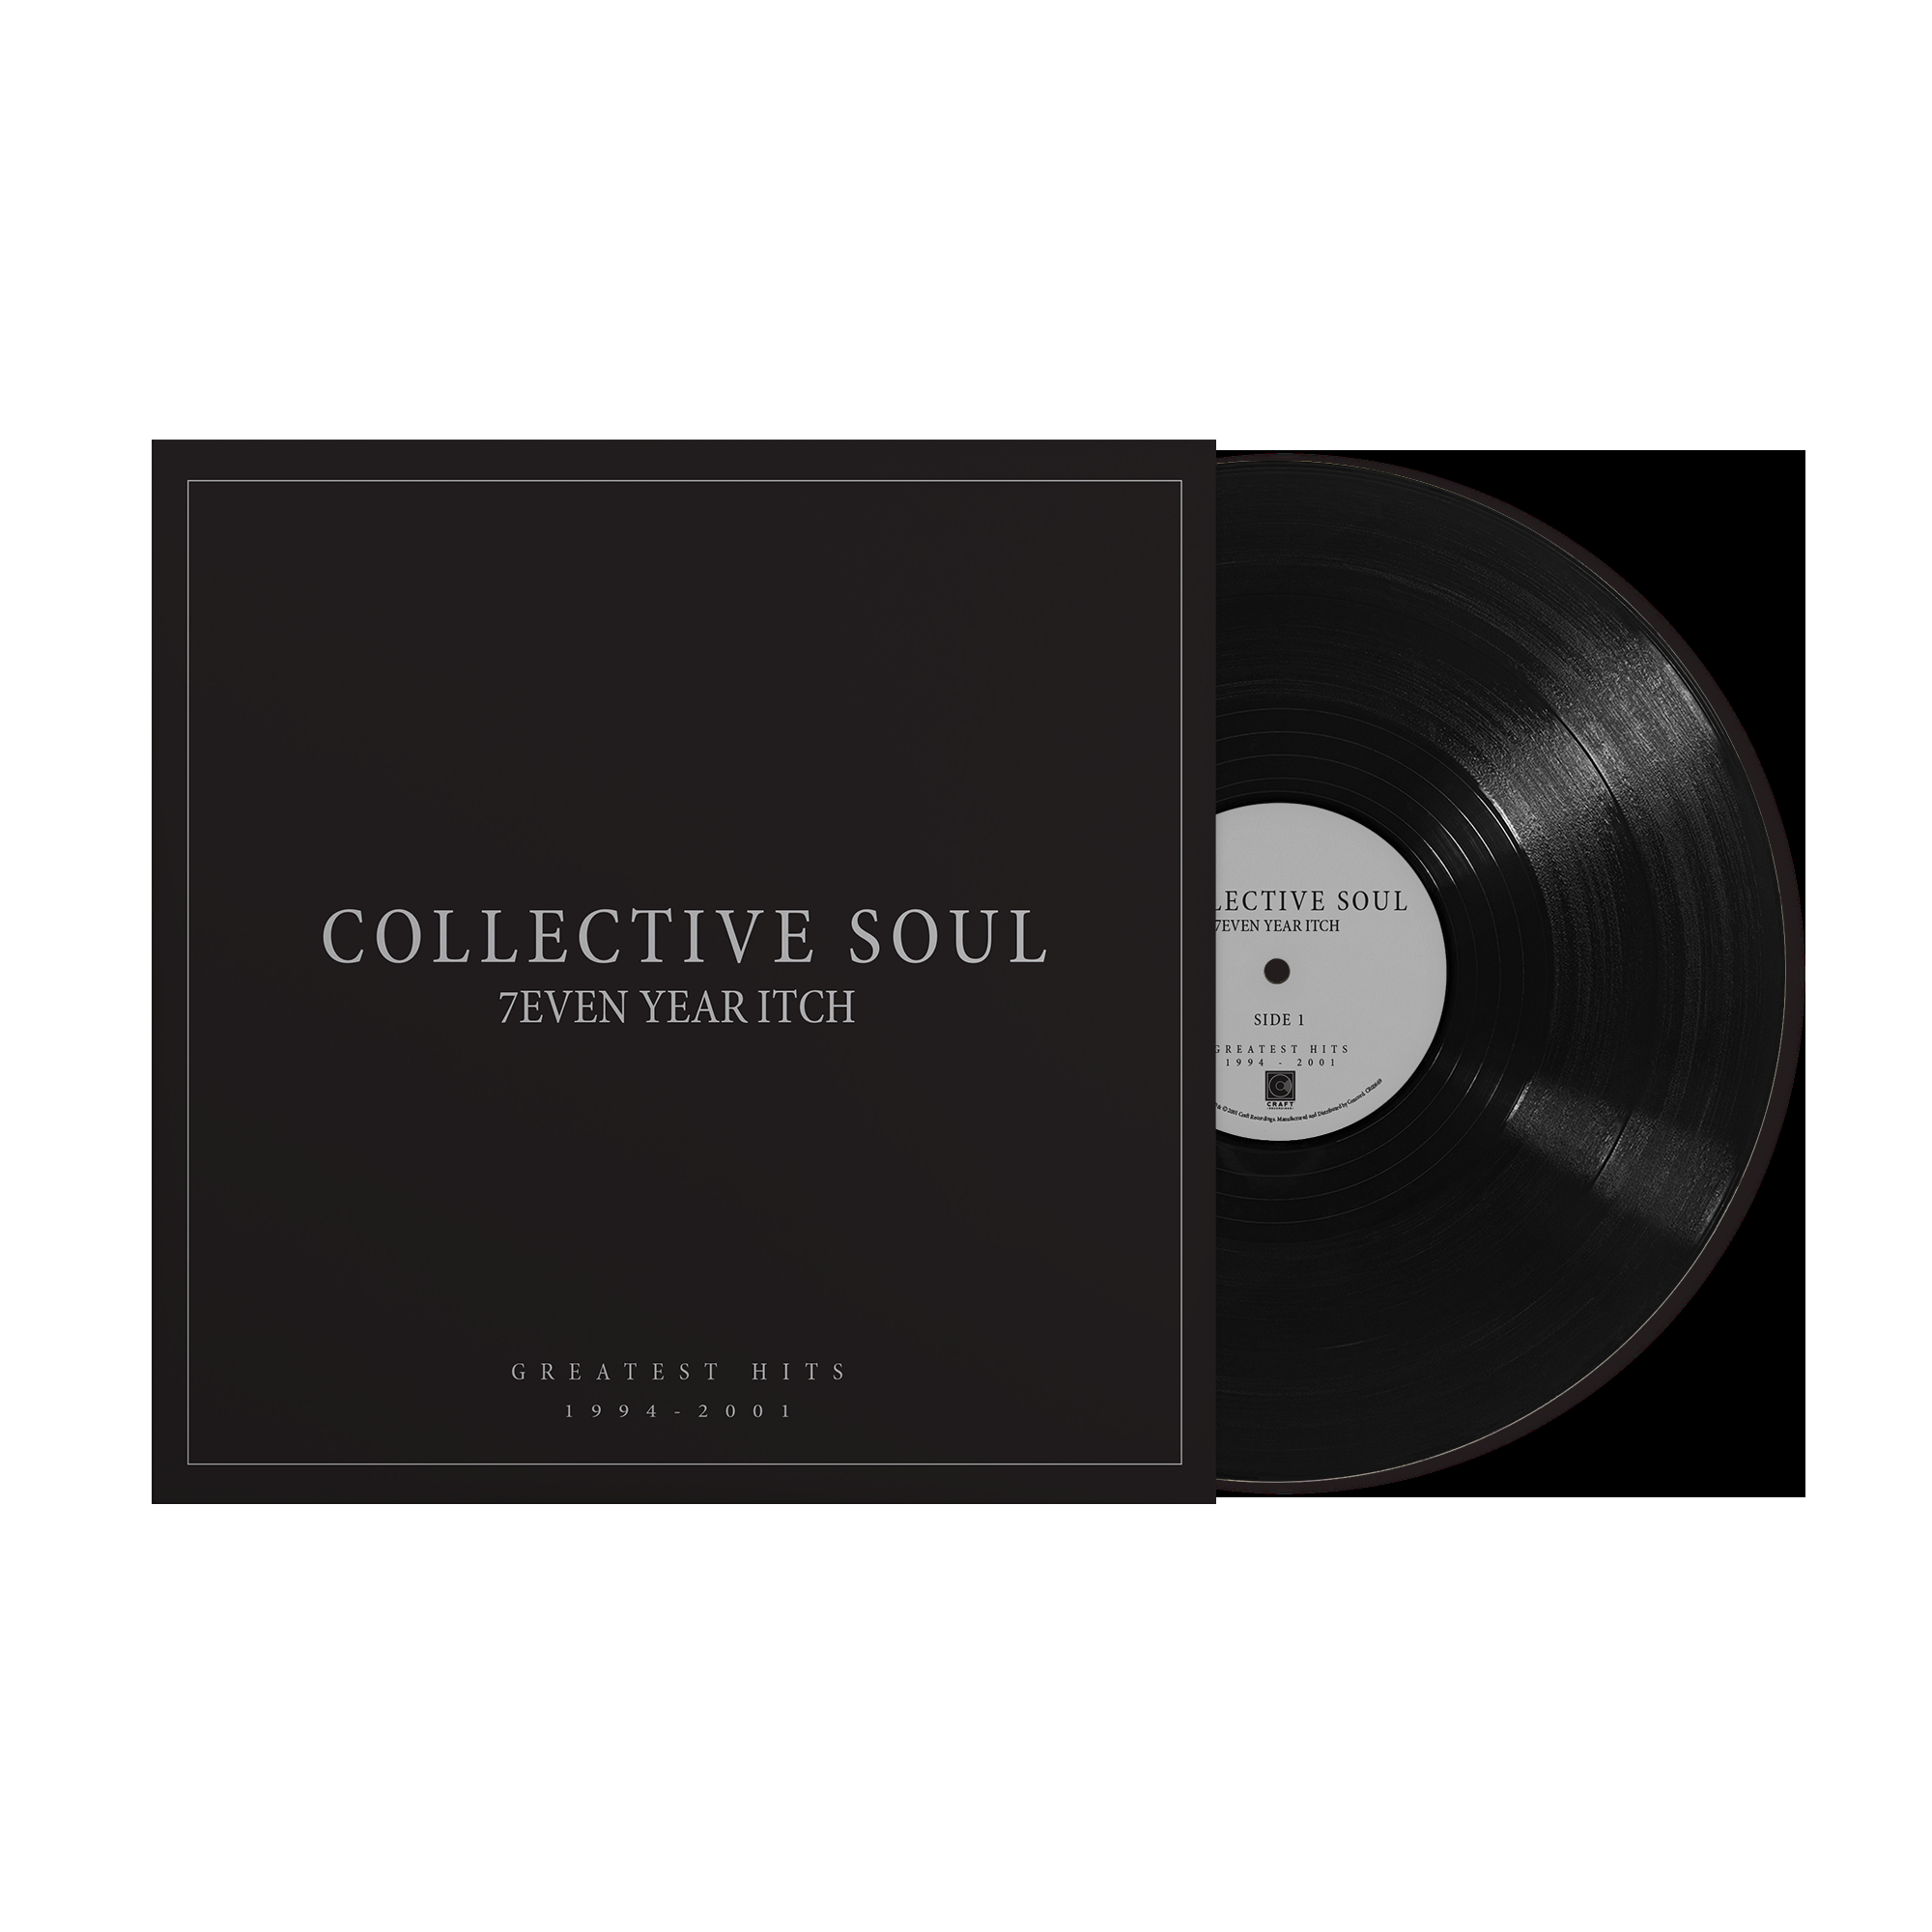 CD Shop - COLLECTIVE SOUL 7even Year Itch: Greatest Hits, 1994-2001